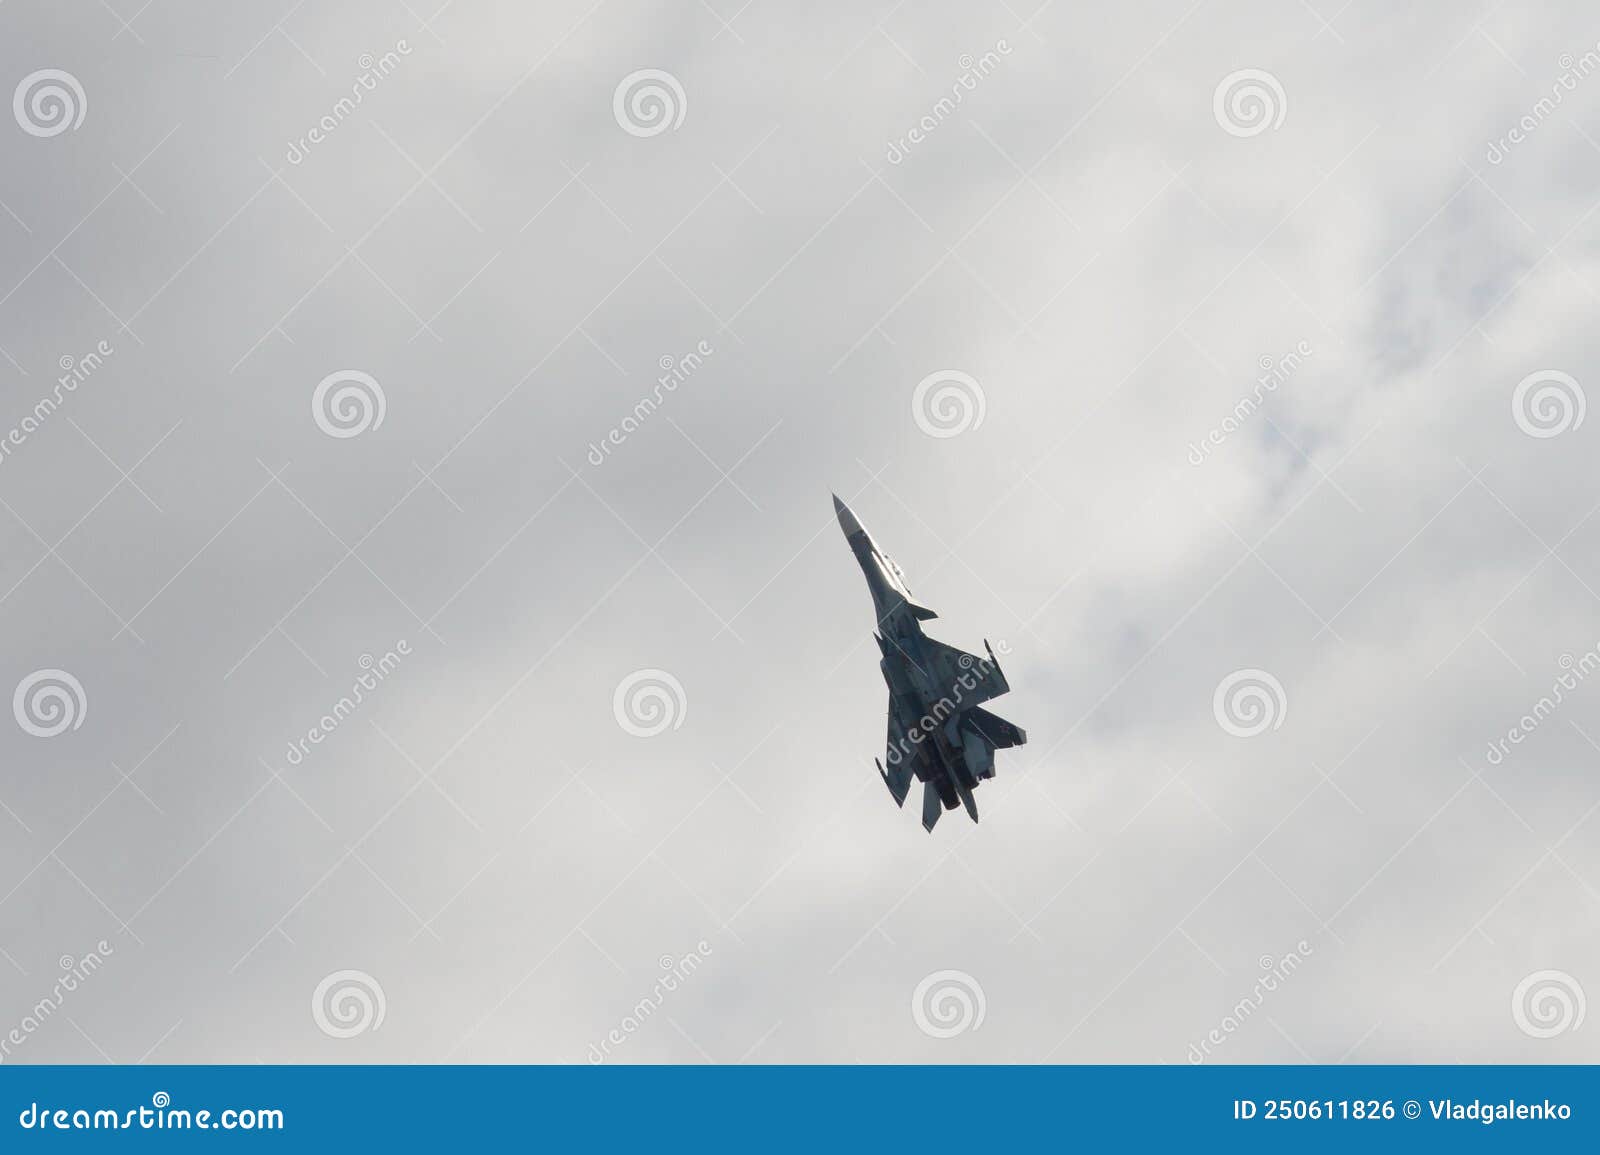 russian two-seat twin-engine super maneuverable deck-mounted multi-purpose fighter su-30cm flanker-c in the sky at  internationa